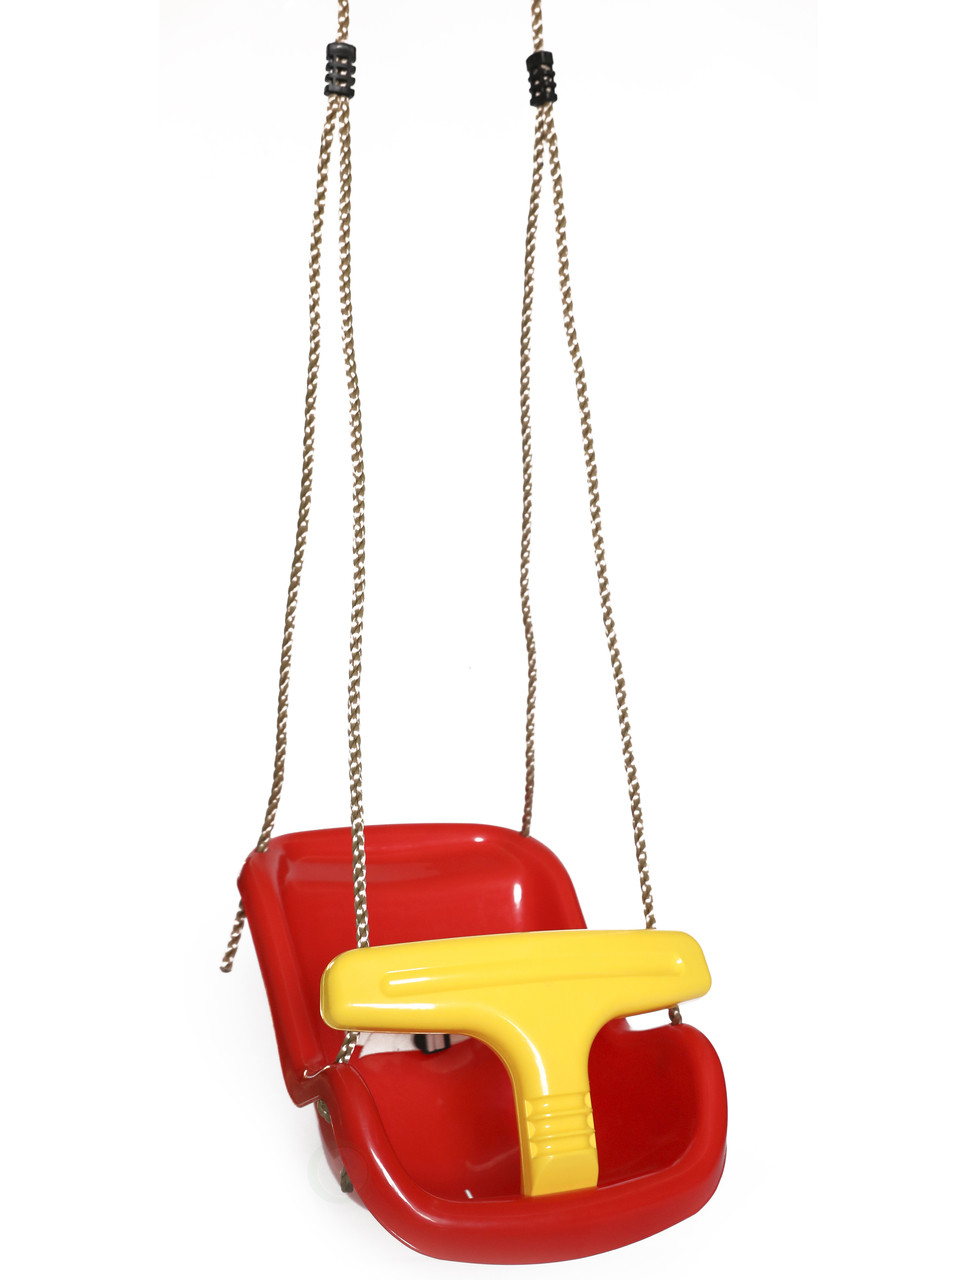 Outdoor Wooden Tree Swing with Hanging Ropes - PLAYBERG